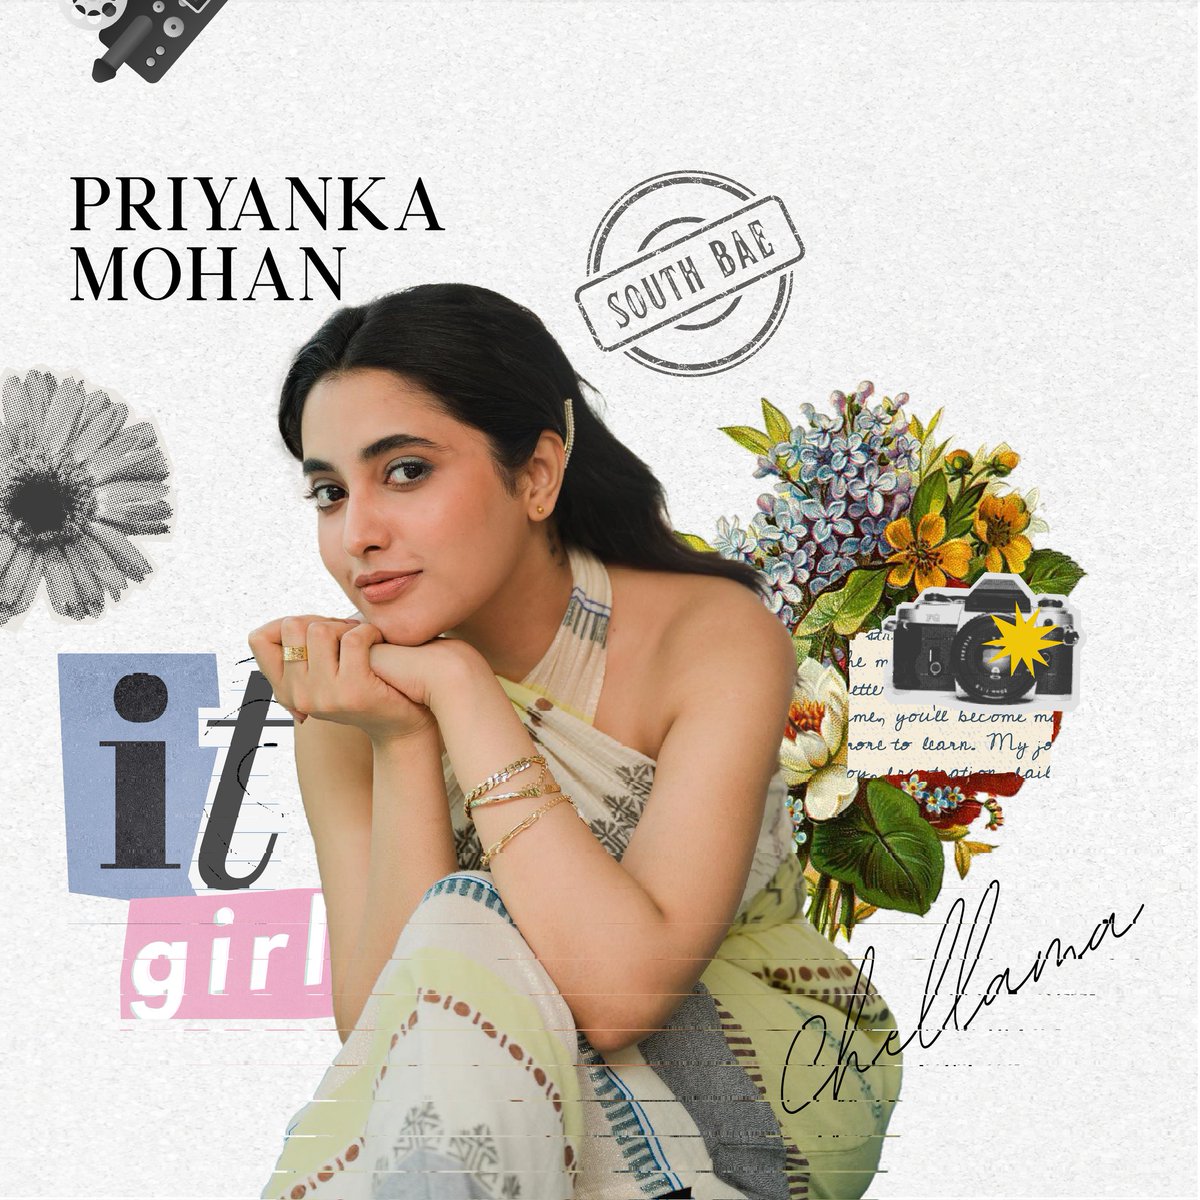 The reigning 'it girl', South Bae Priyanka Mohan, whose energy and grace illuminate every frame. @priyankaamohan #Southbay #SouthbayTalent #Priyankamohan #itgirl #IndianCinema #Indianactor